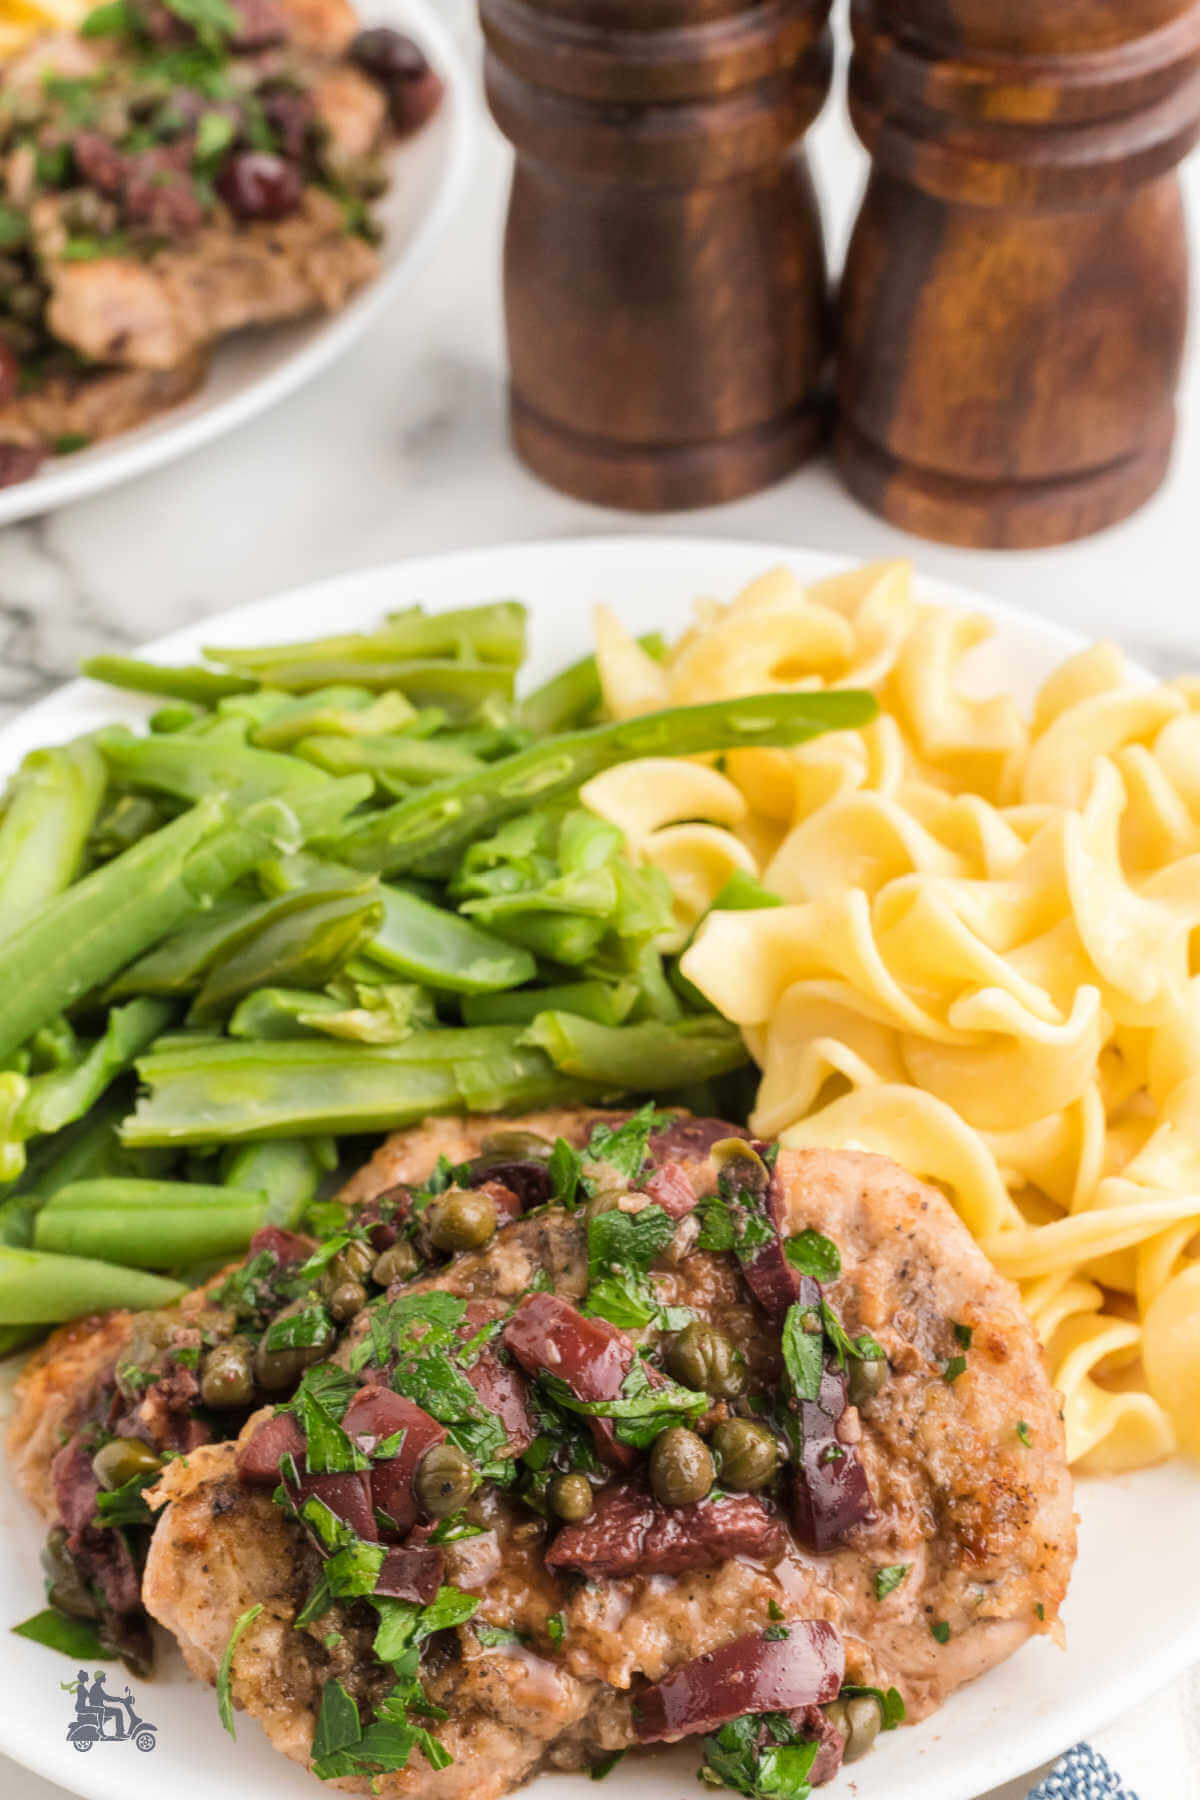 Pork Tenderloin Medallions with an Olive Caper Sauce on a plate with egg noodles and French style green beans.